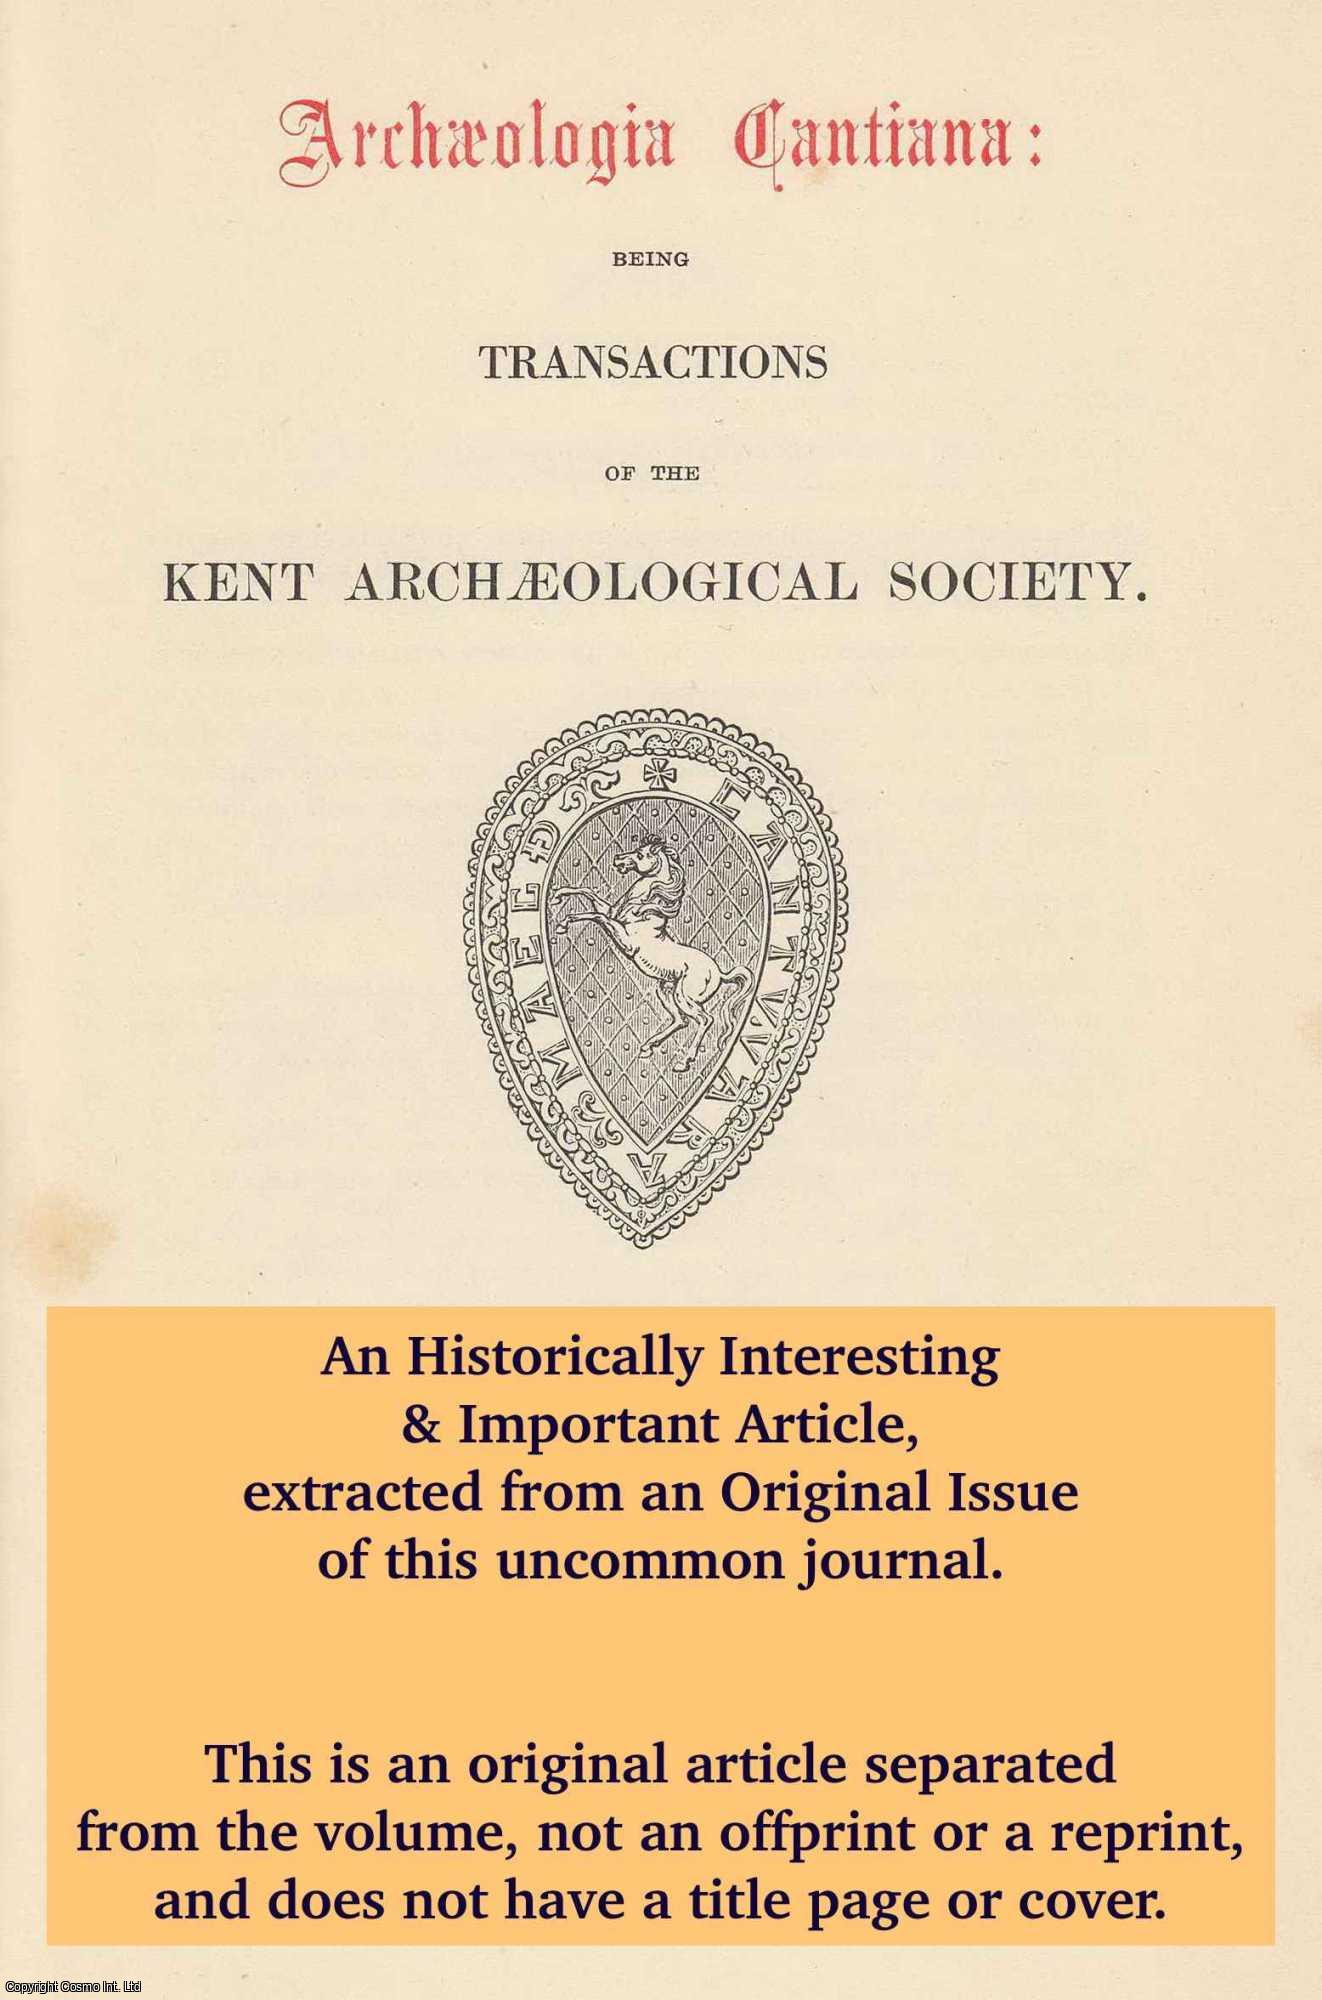 F. Hull - John de Berwyke and the Consuetudines Kancie. An original article from The Archaeologia Cantiana: Transactions of The Kent Archaeological Society, 1981.